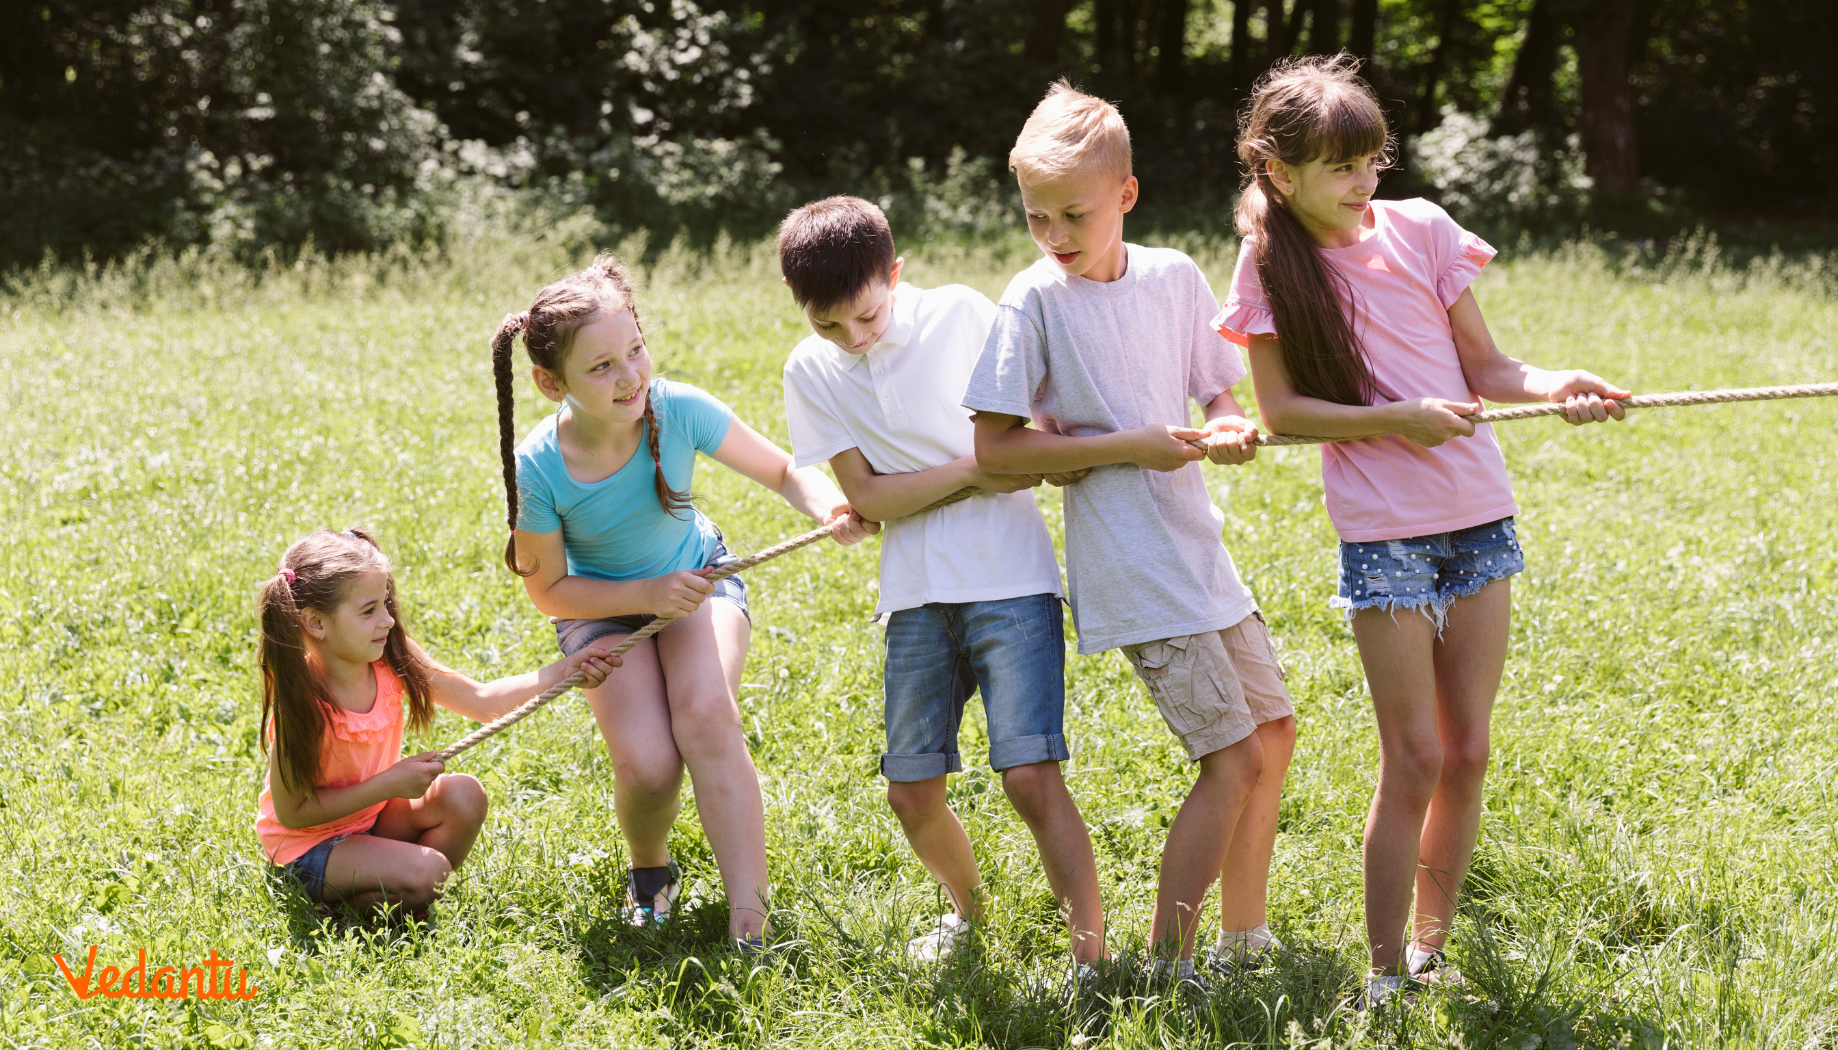 15+ Outdoor Games and Activities for Kids of All Ages